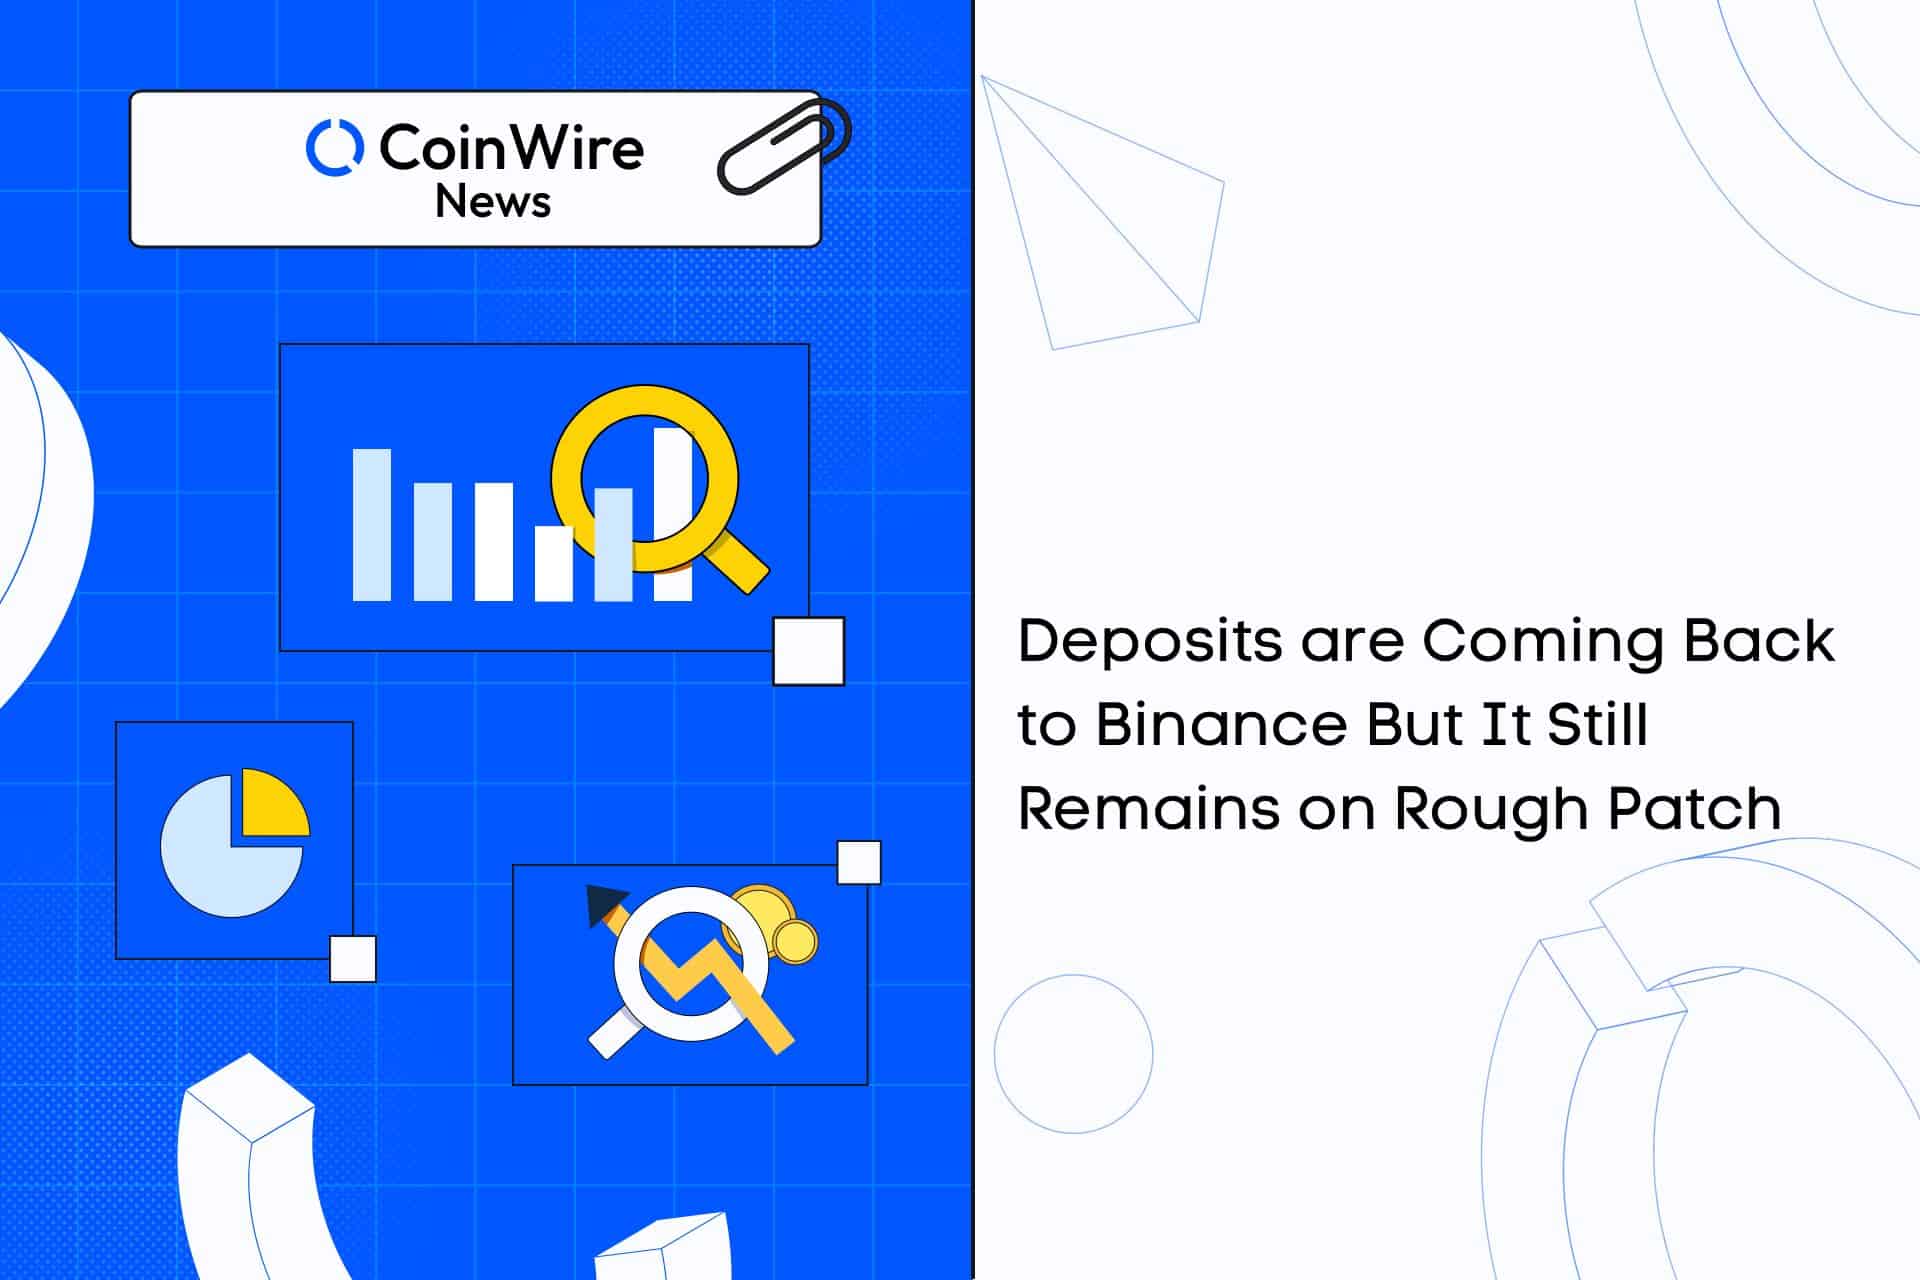 Deposits Are Coming Back To Binance But It Still Remains On Rough Patch